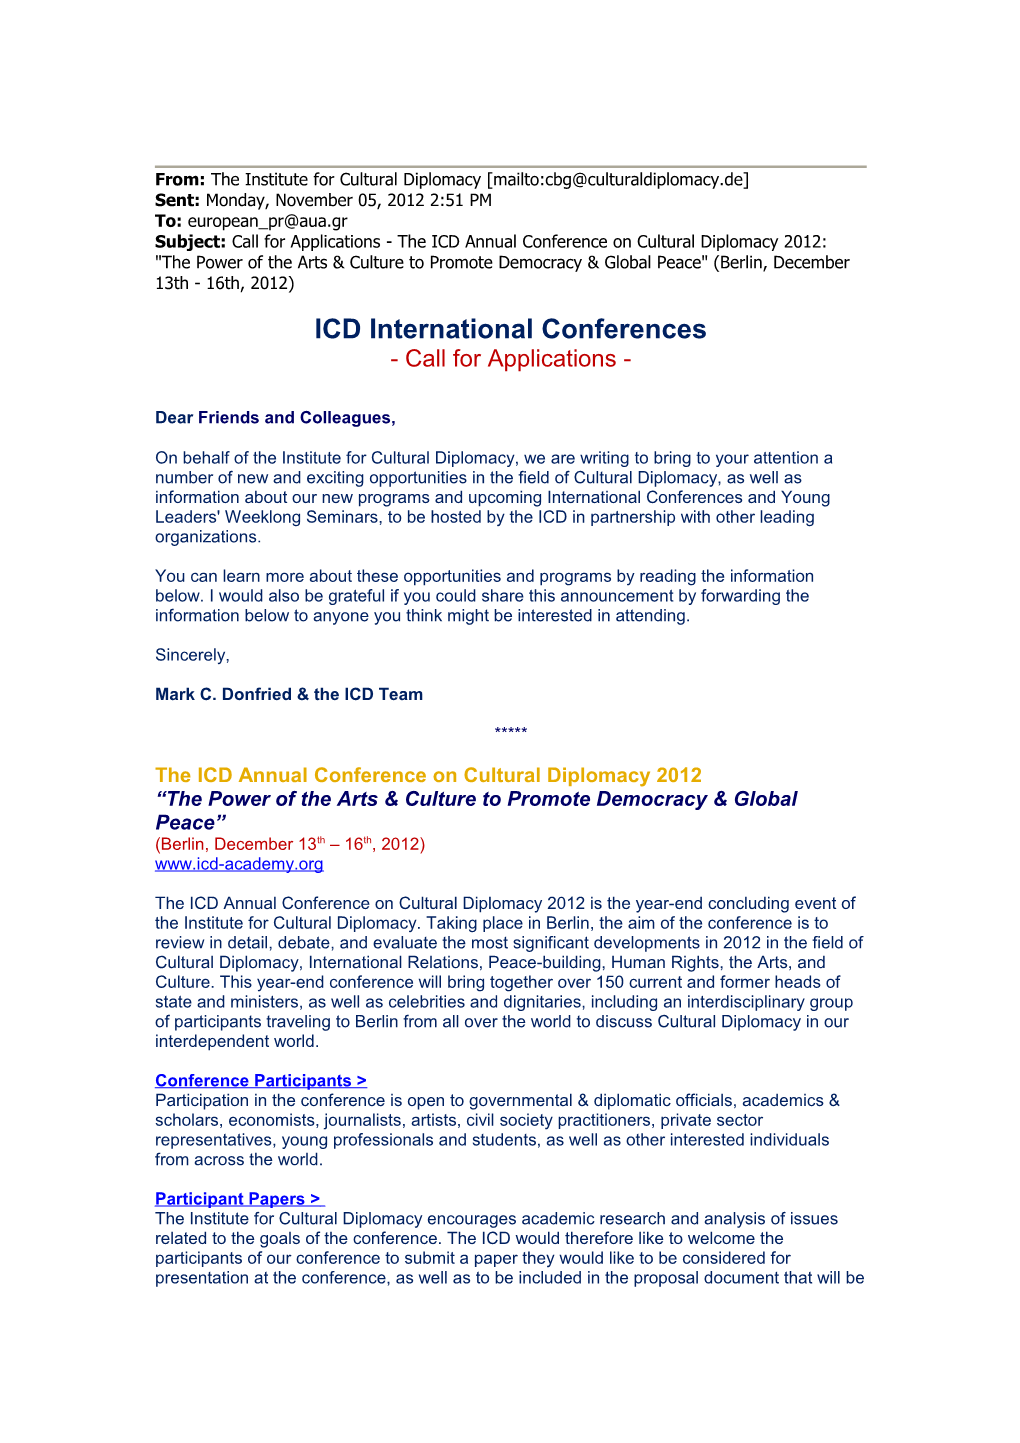 ICD International Conferences